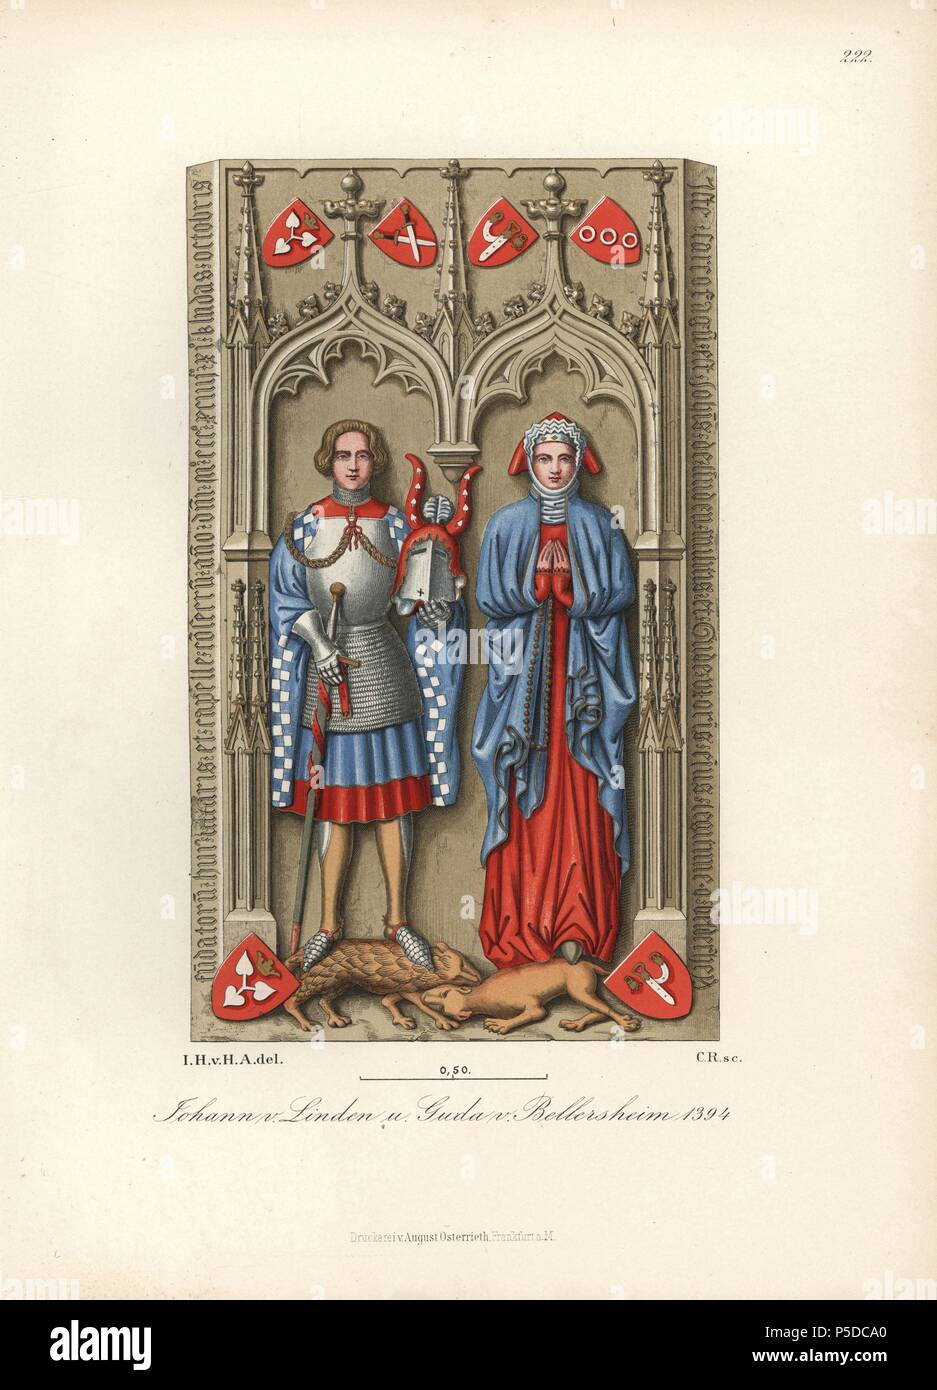 Battle armour and marriage clothes of Johann von Linden and Guda von Bellersheim, 1394, from Kloster Urnsburg. Chromolithograph from Hefner-Alteneck's 'Costumes, Artworks and Appliances from the early Middle Ages to the end of the 18th Century,' Frankfurt, 1883. IIlustration drawn by Hefner-Alteneck, lithographed by C. Regnier, and published by Heinrich Keller. Dr. Jakob Heinrich von Hefner-Alteneck (1811-1903) was a German archeologist, art historian and illustrator. He was director of the Bavarian National Museum from 1868 until 1886. Stock Photo